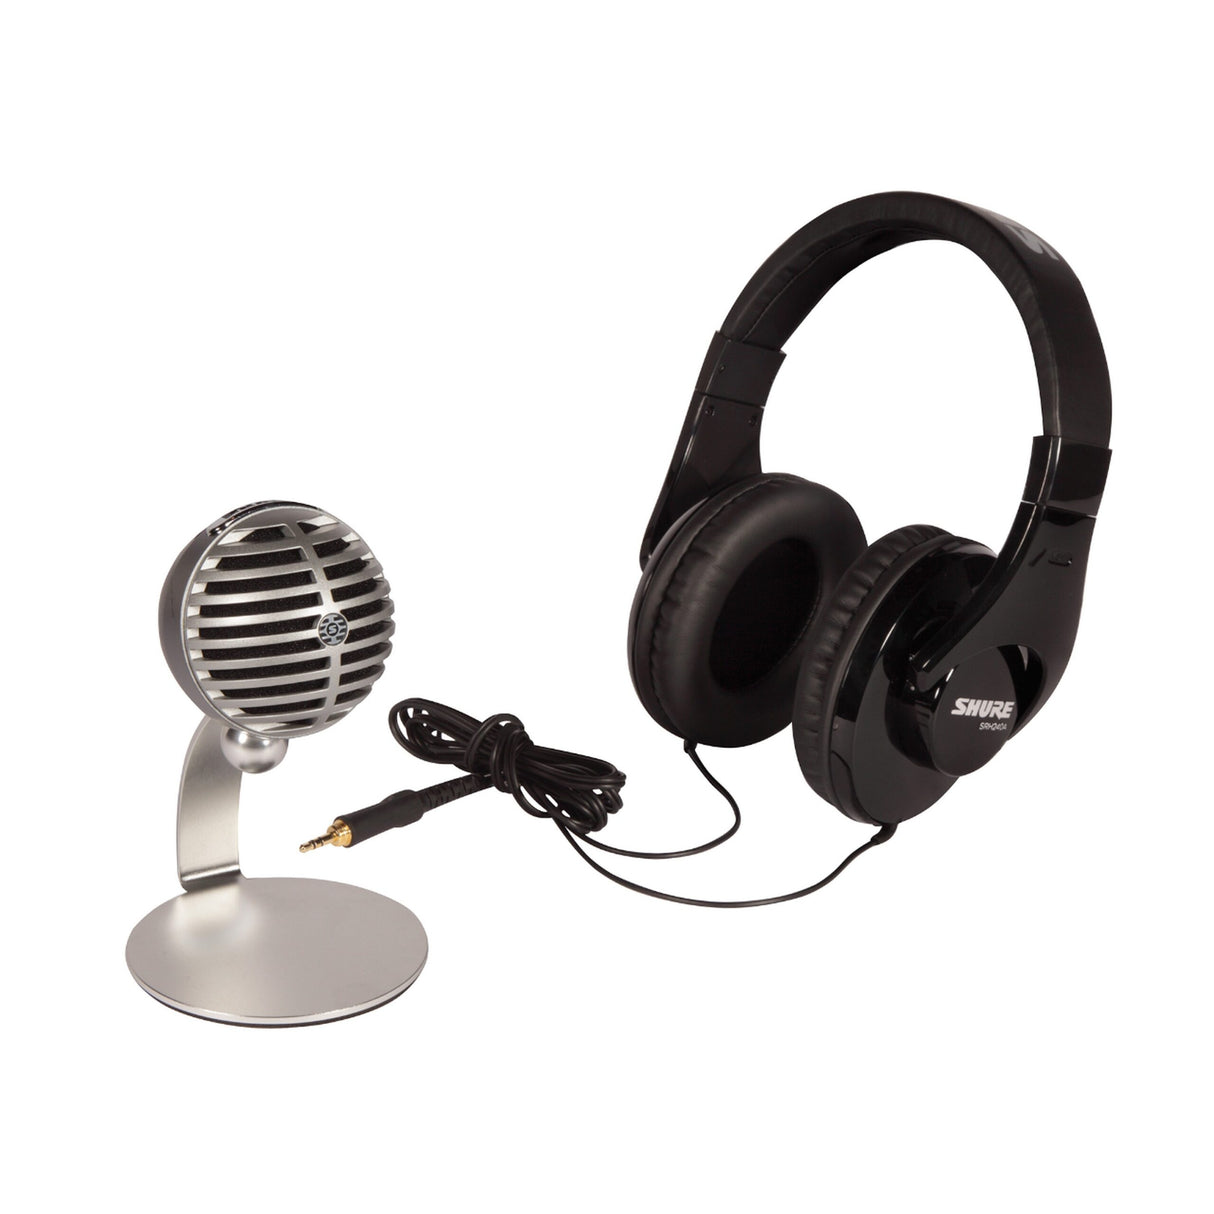 Shure MV5/A-240 BNDL Mobile Recording Kit with MV5/A and SRH240A Headphone